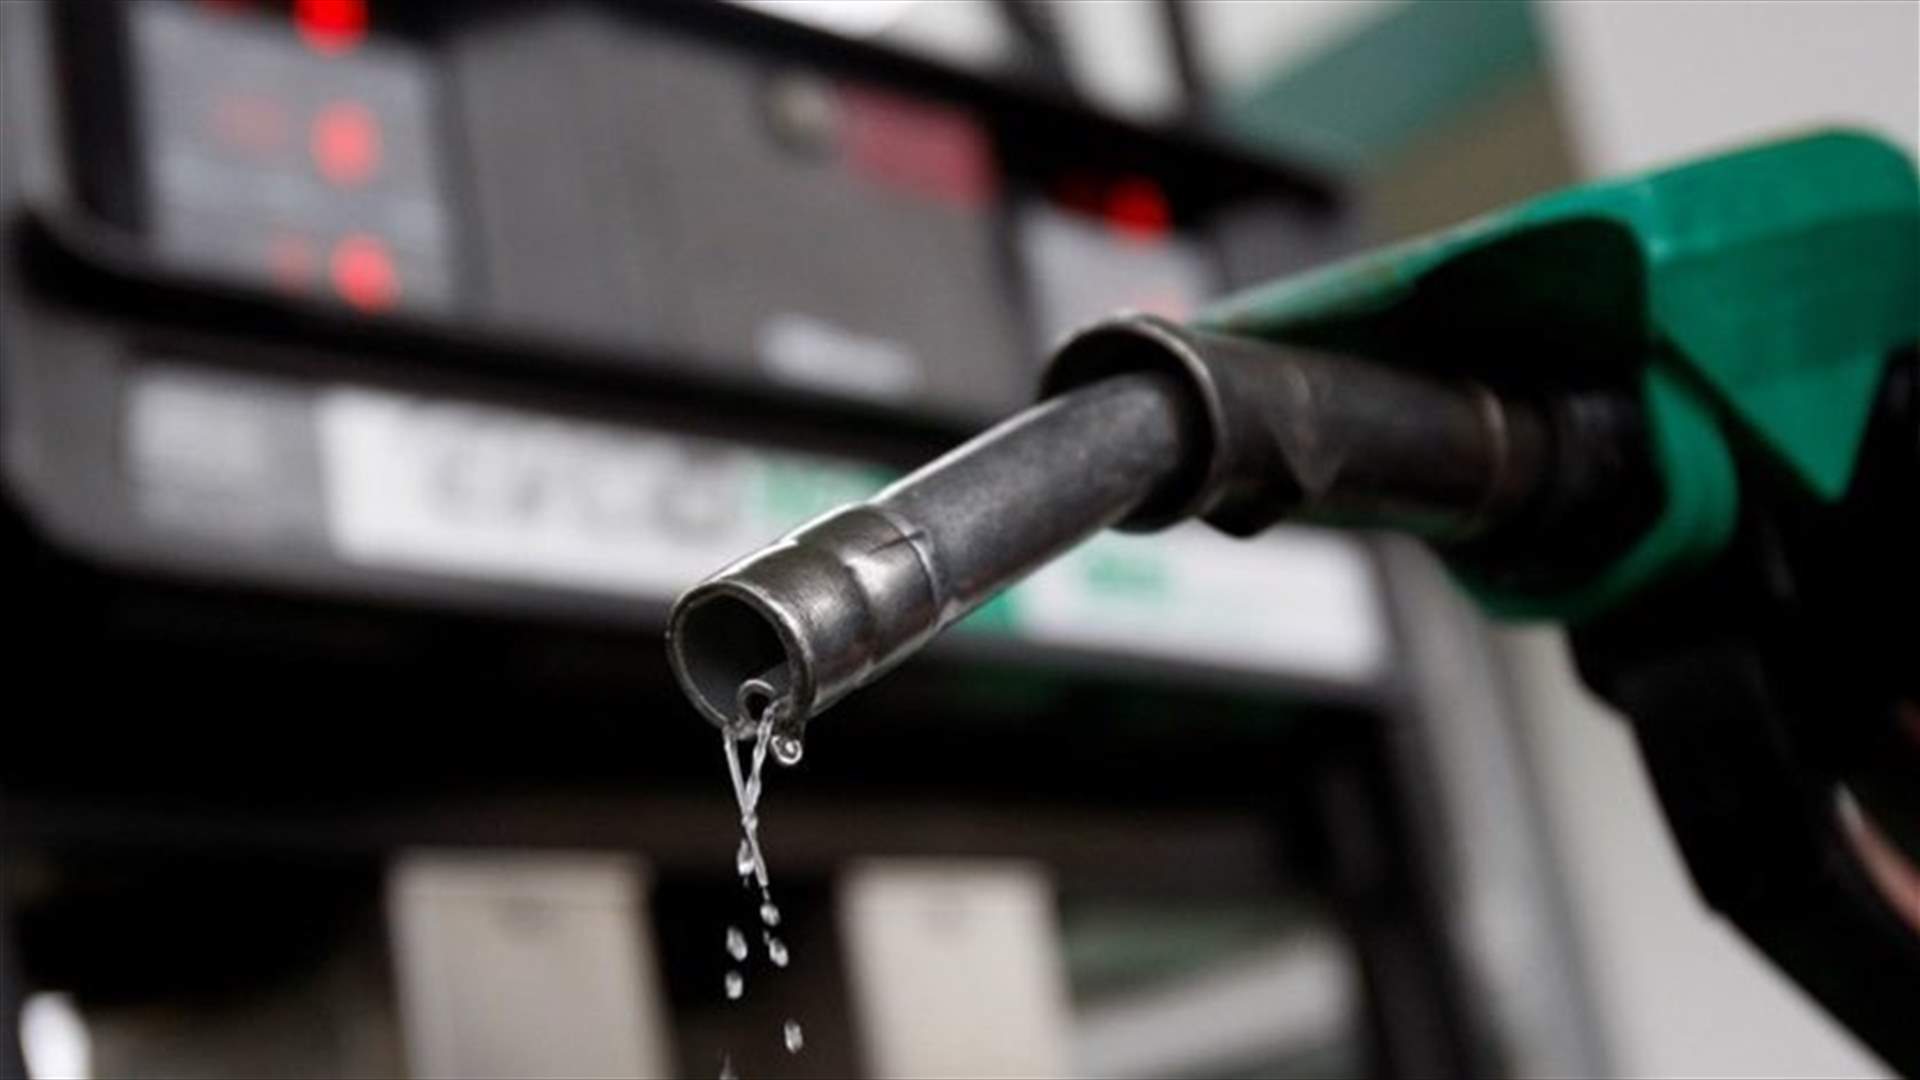 Lebanon’s fuel prices continue to drop